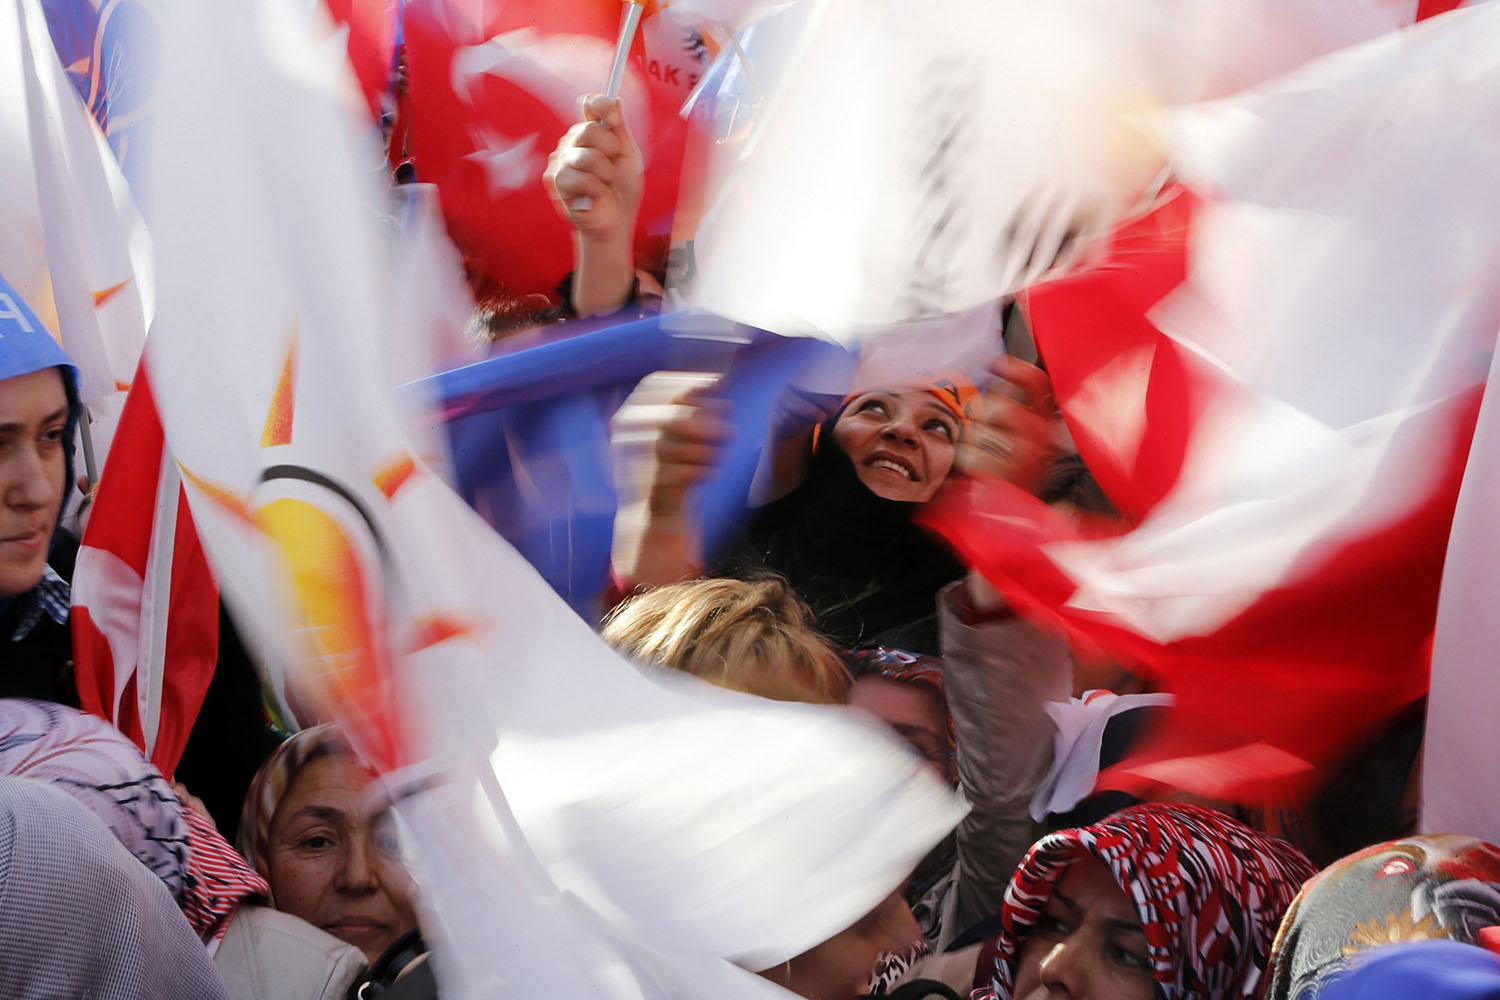 Supporters of ruling AK Party (AKP) wave party flags during an election rally in Kirikkale